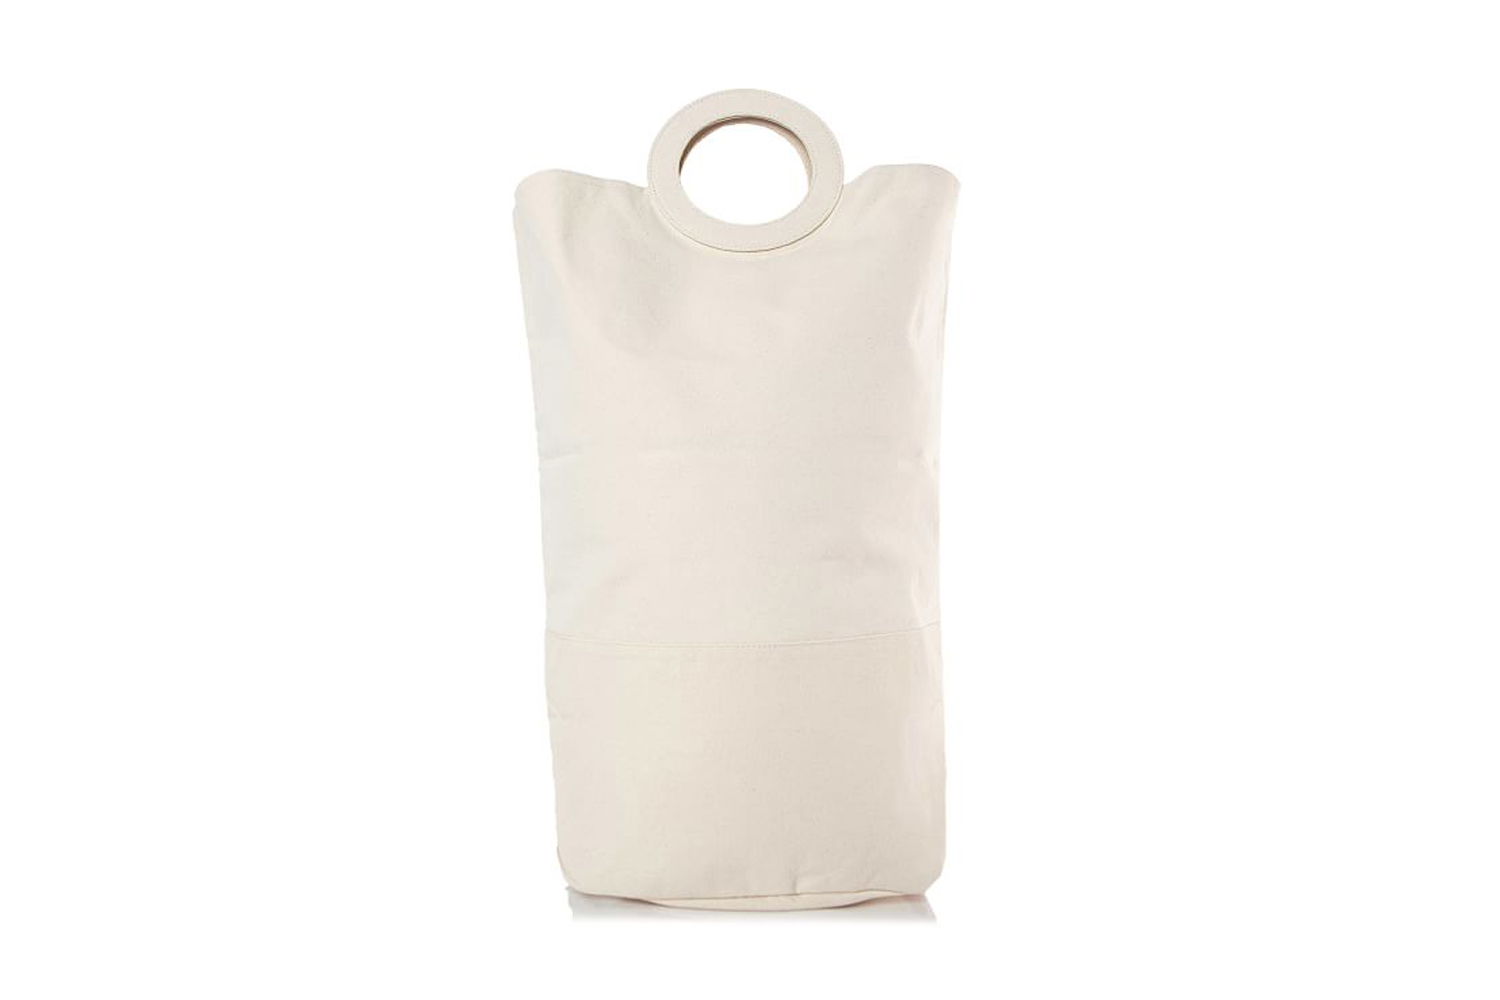 the canvas natural laundry hamper tote is $59 at pottery barn. 14